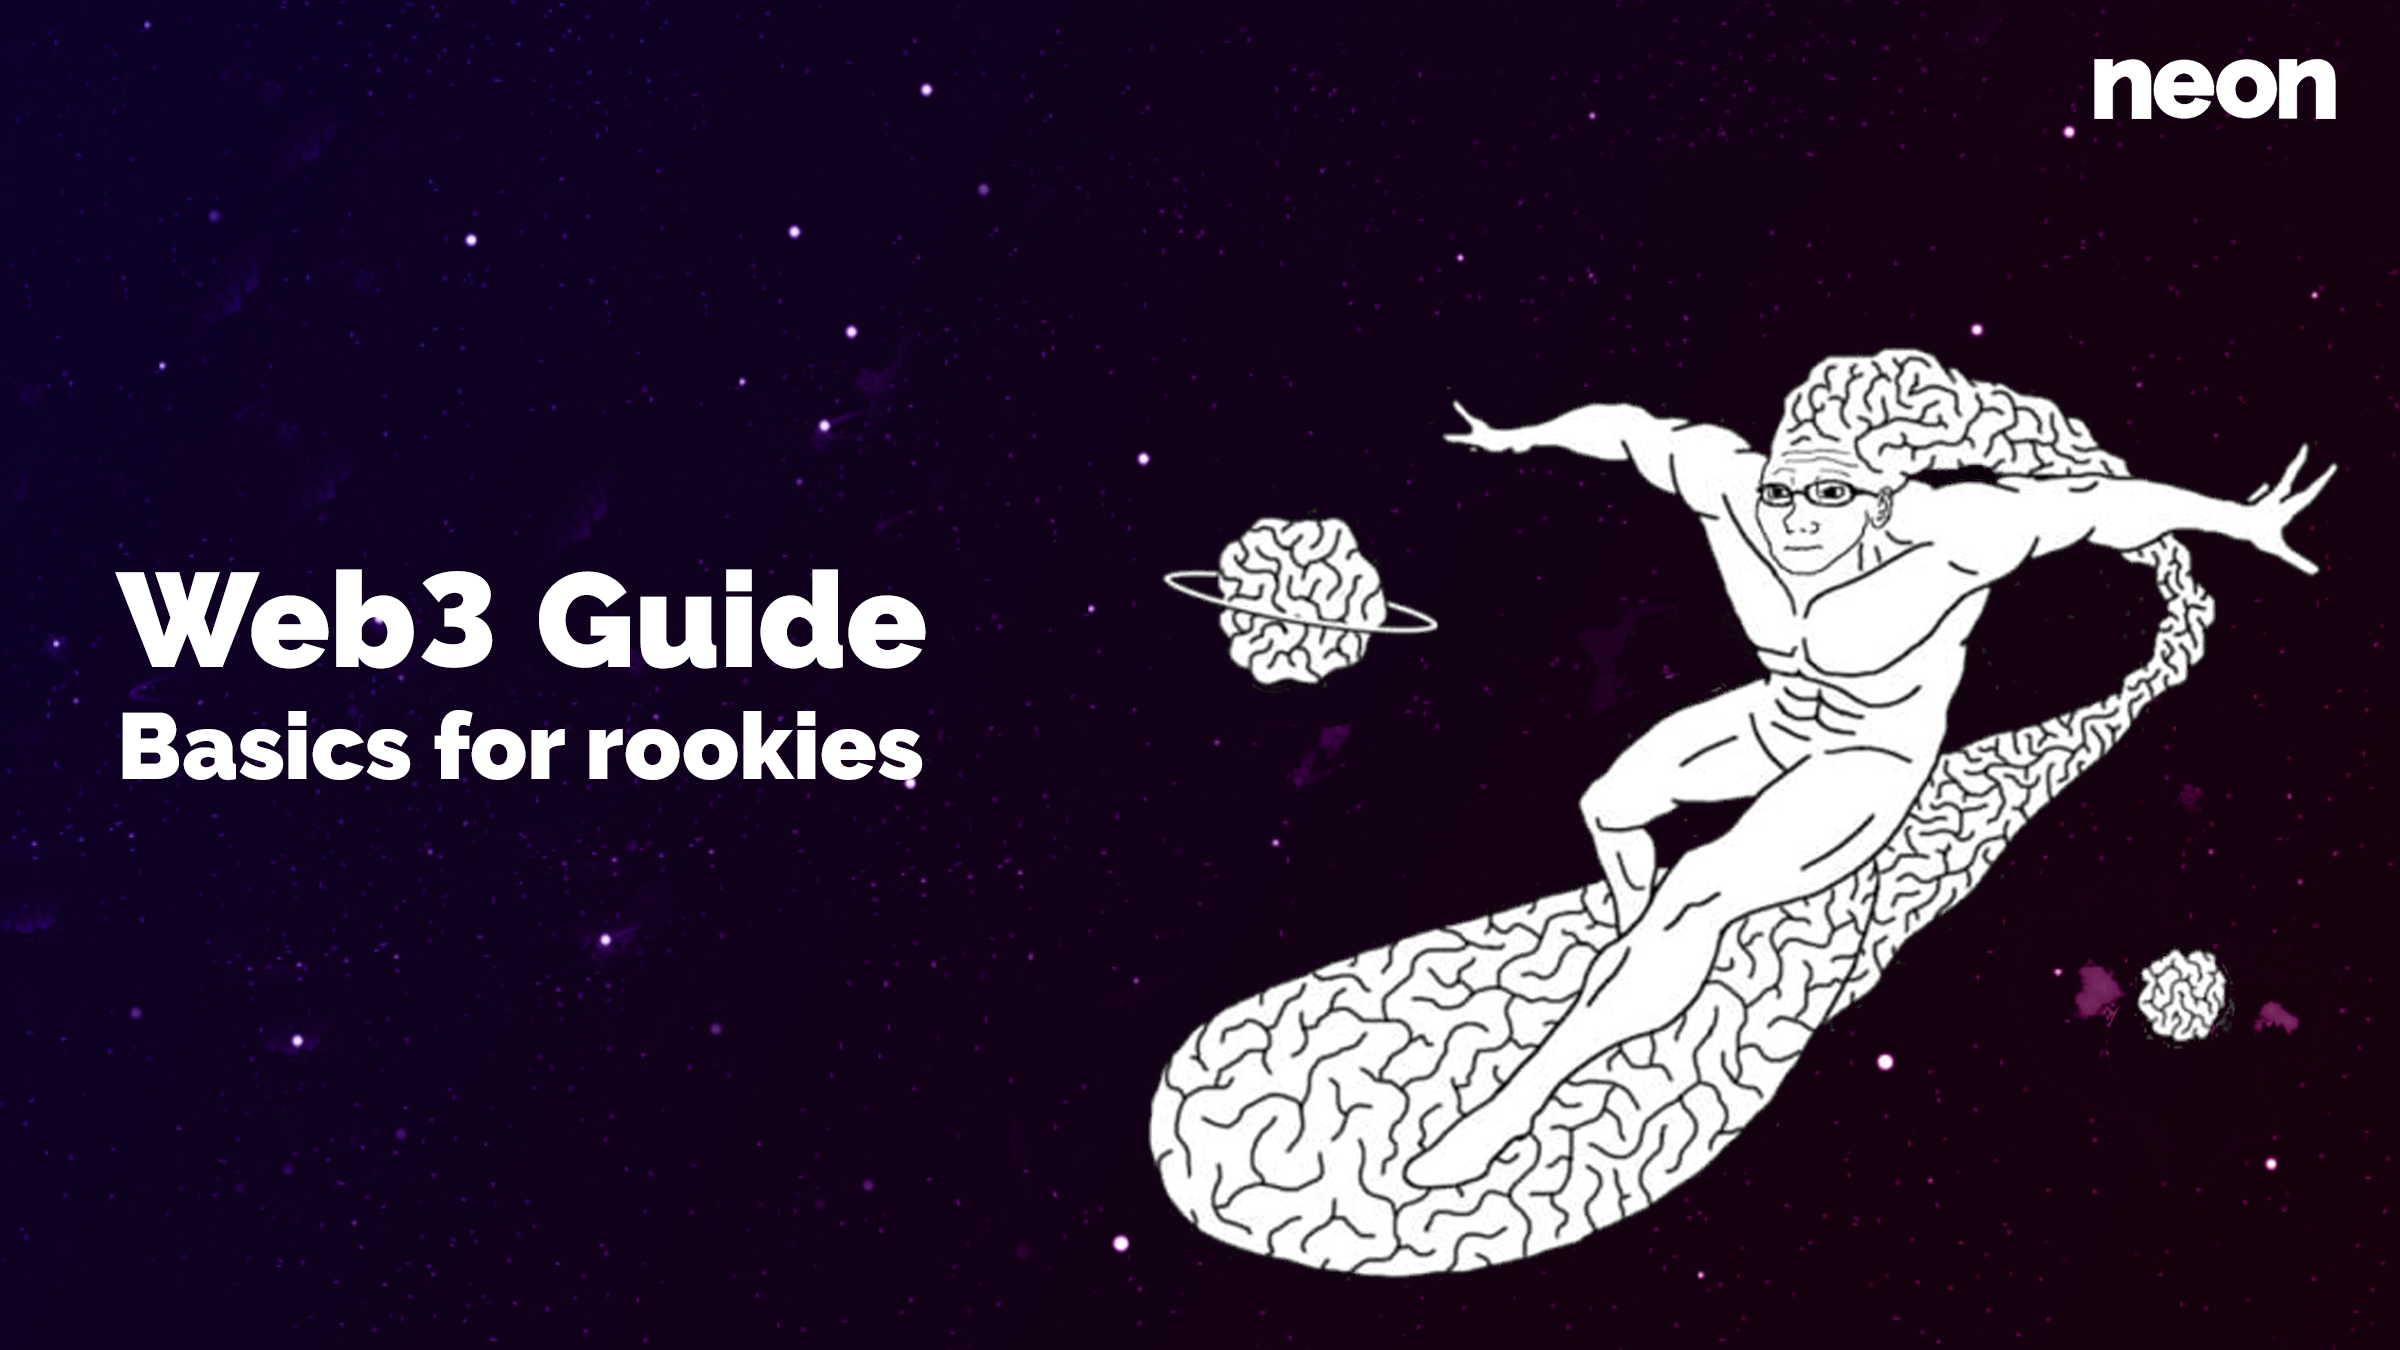 Web3 Guide: Basics for rookies